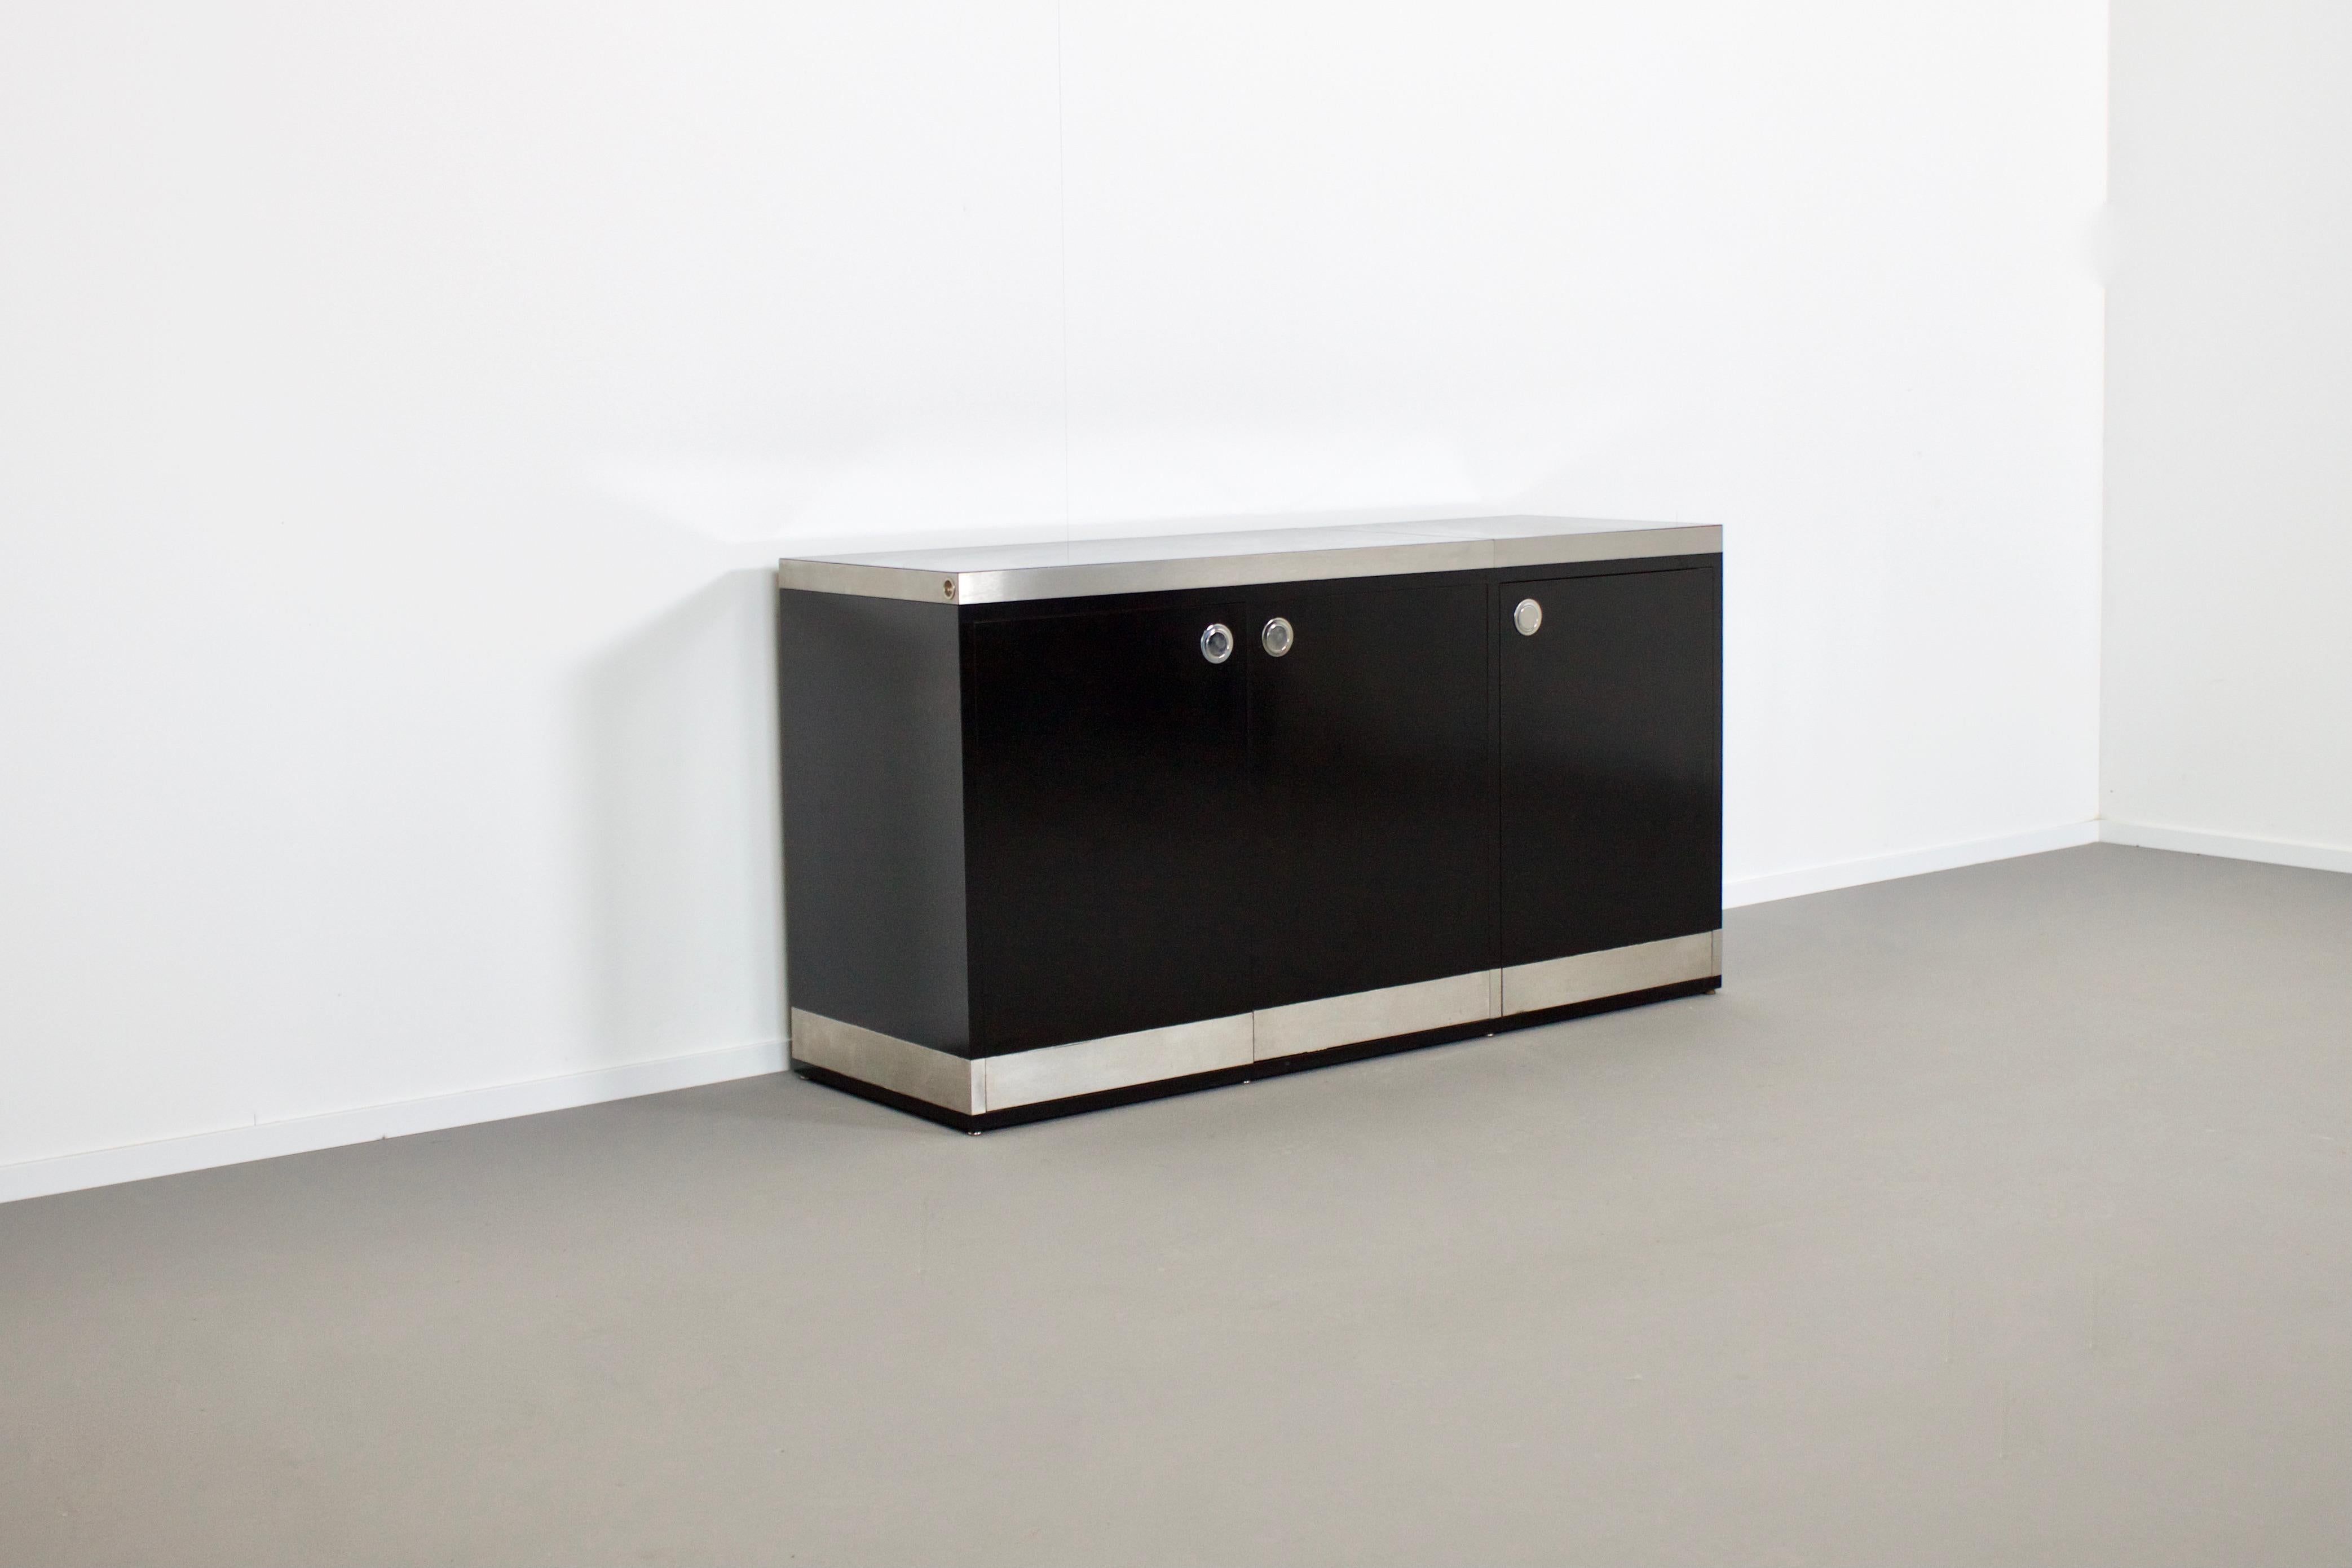 Hollywood Regency Stunning Willy Rizzo Bar / Sideboard in Black and Stainless Steel, Italy, 1969